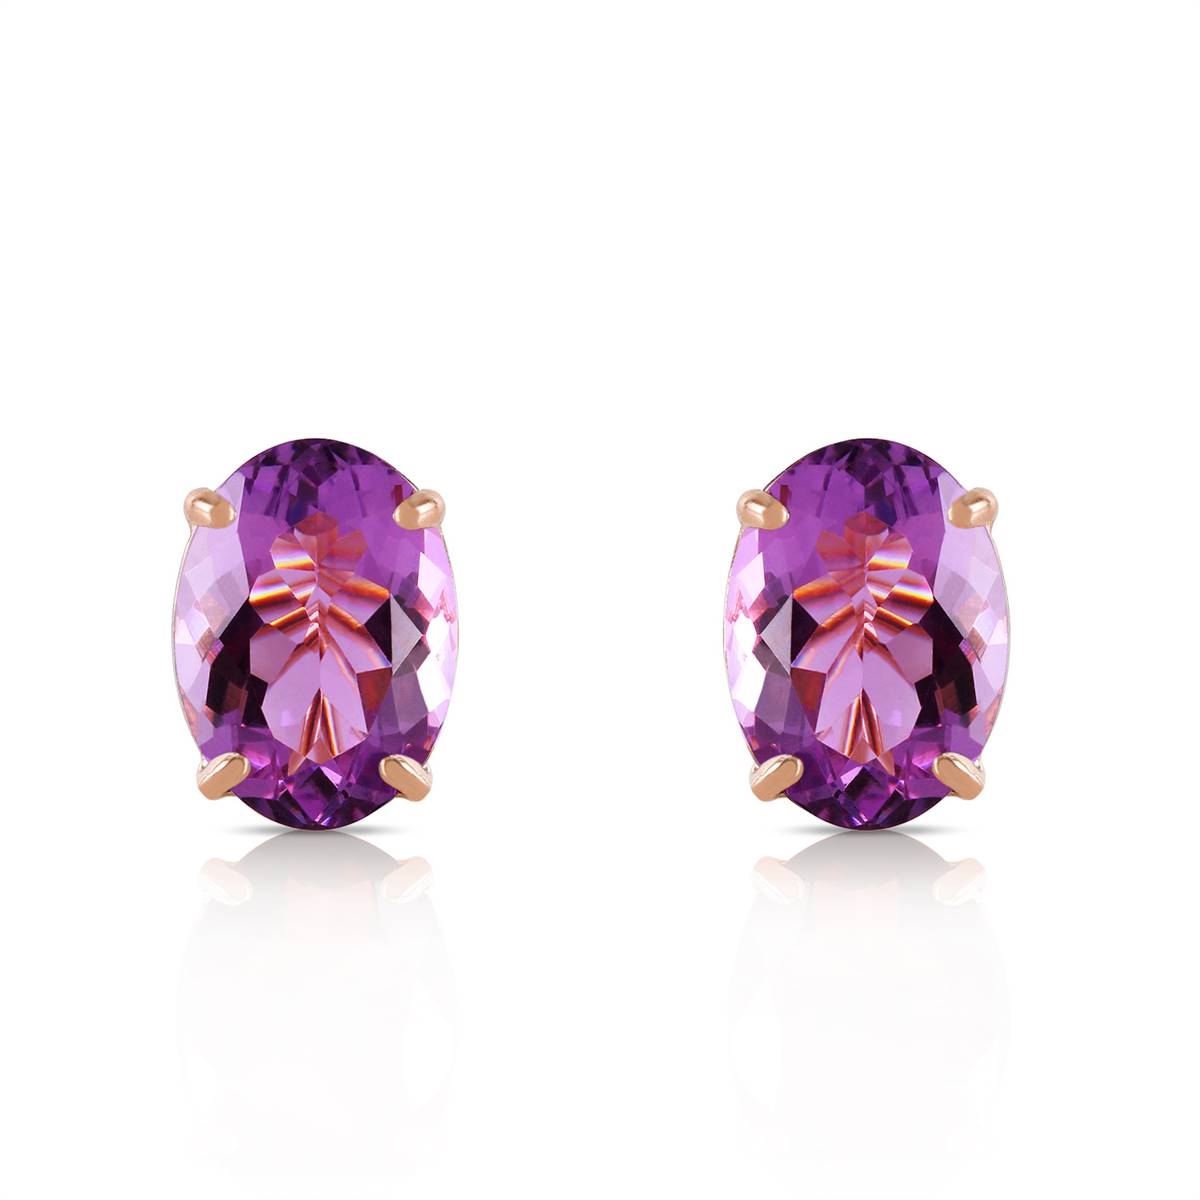 1.8 Carat 14K Solid Yellow Gold To Immortality Amethyst Earrings